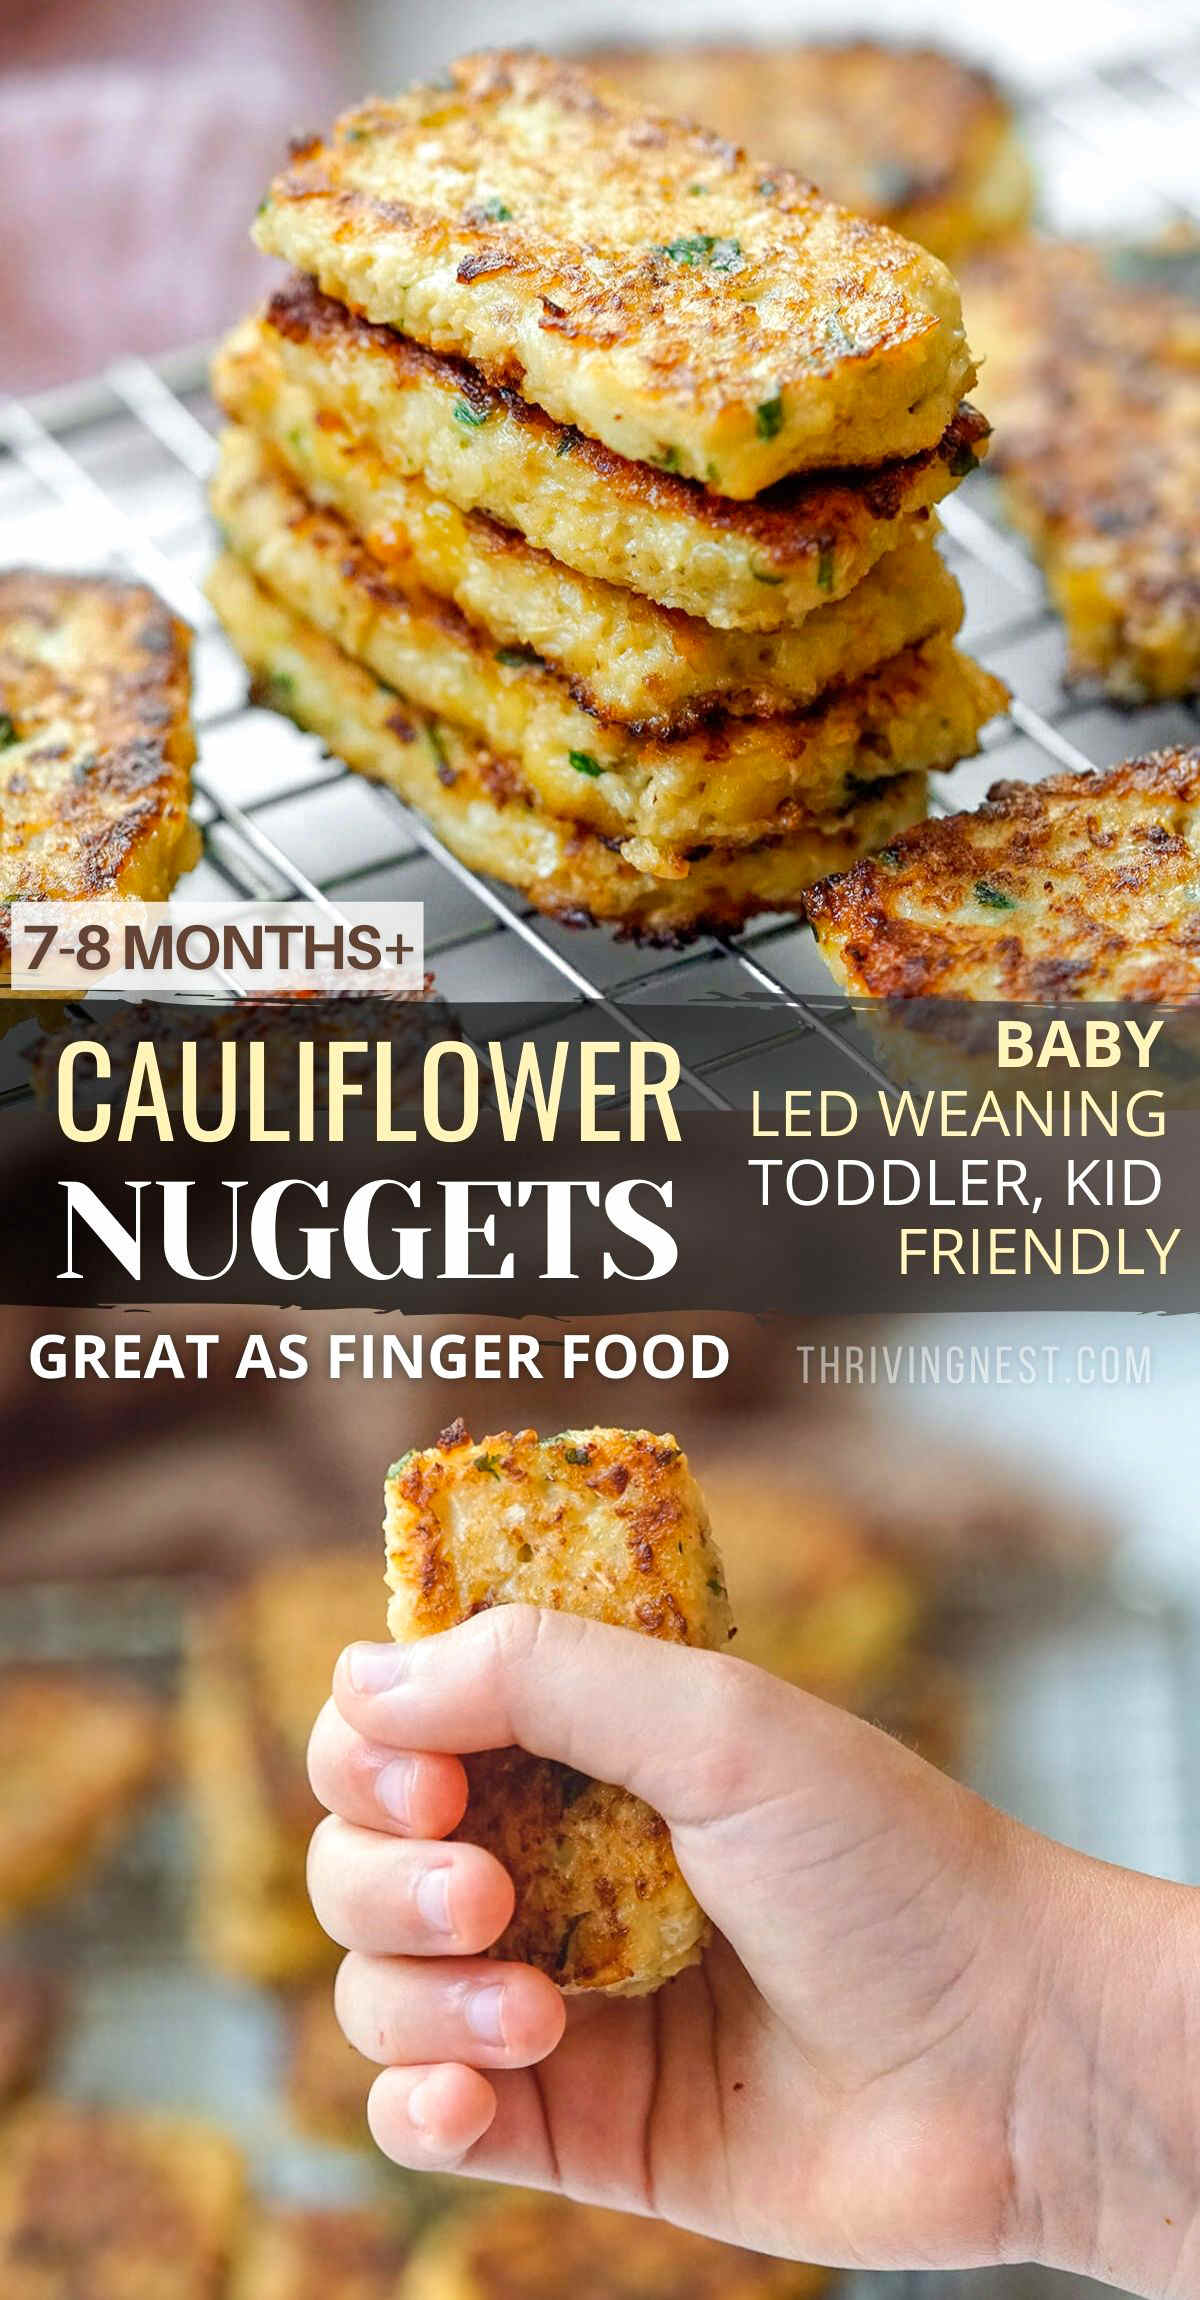 Looking for cauliflower baby food recipes? These cauliflower nuggets (also called cauliflower tots or bites) are small in size, making a great finger food for baby led weaning, toddlers, older kids and even adults. This is a perfect cauliflower recipe for babies who need to develop their motor skills and discover new food textures. Make the cauliflower nuggets healthier baked,  or fryed. #cauliflower #baby #fingerfood #kidsrecipes #cauliflowernuggets #cauliflowertots #cauliflowerbites #toddler